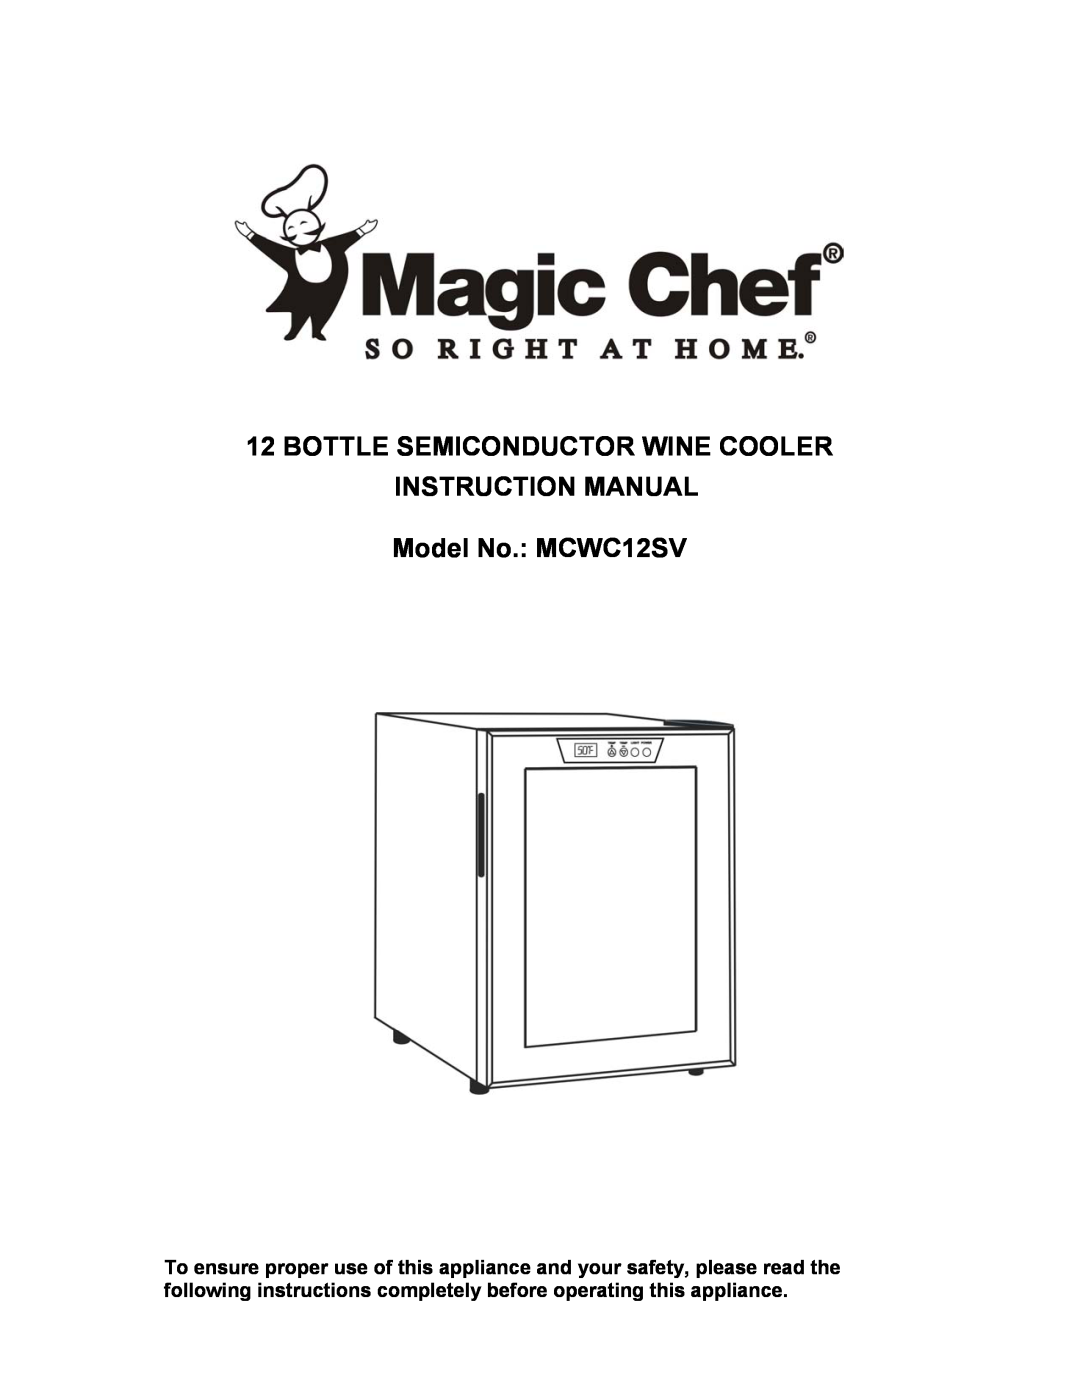 Magic Chef MCWC12SV instruction manual Bottle Semiconductor Wine Cooler 